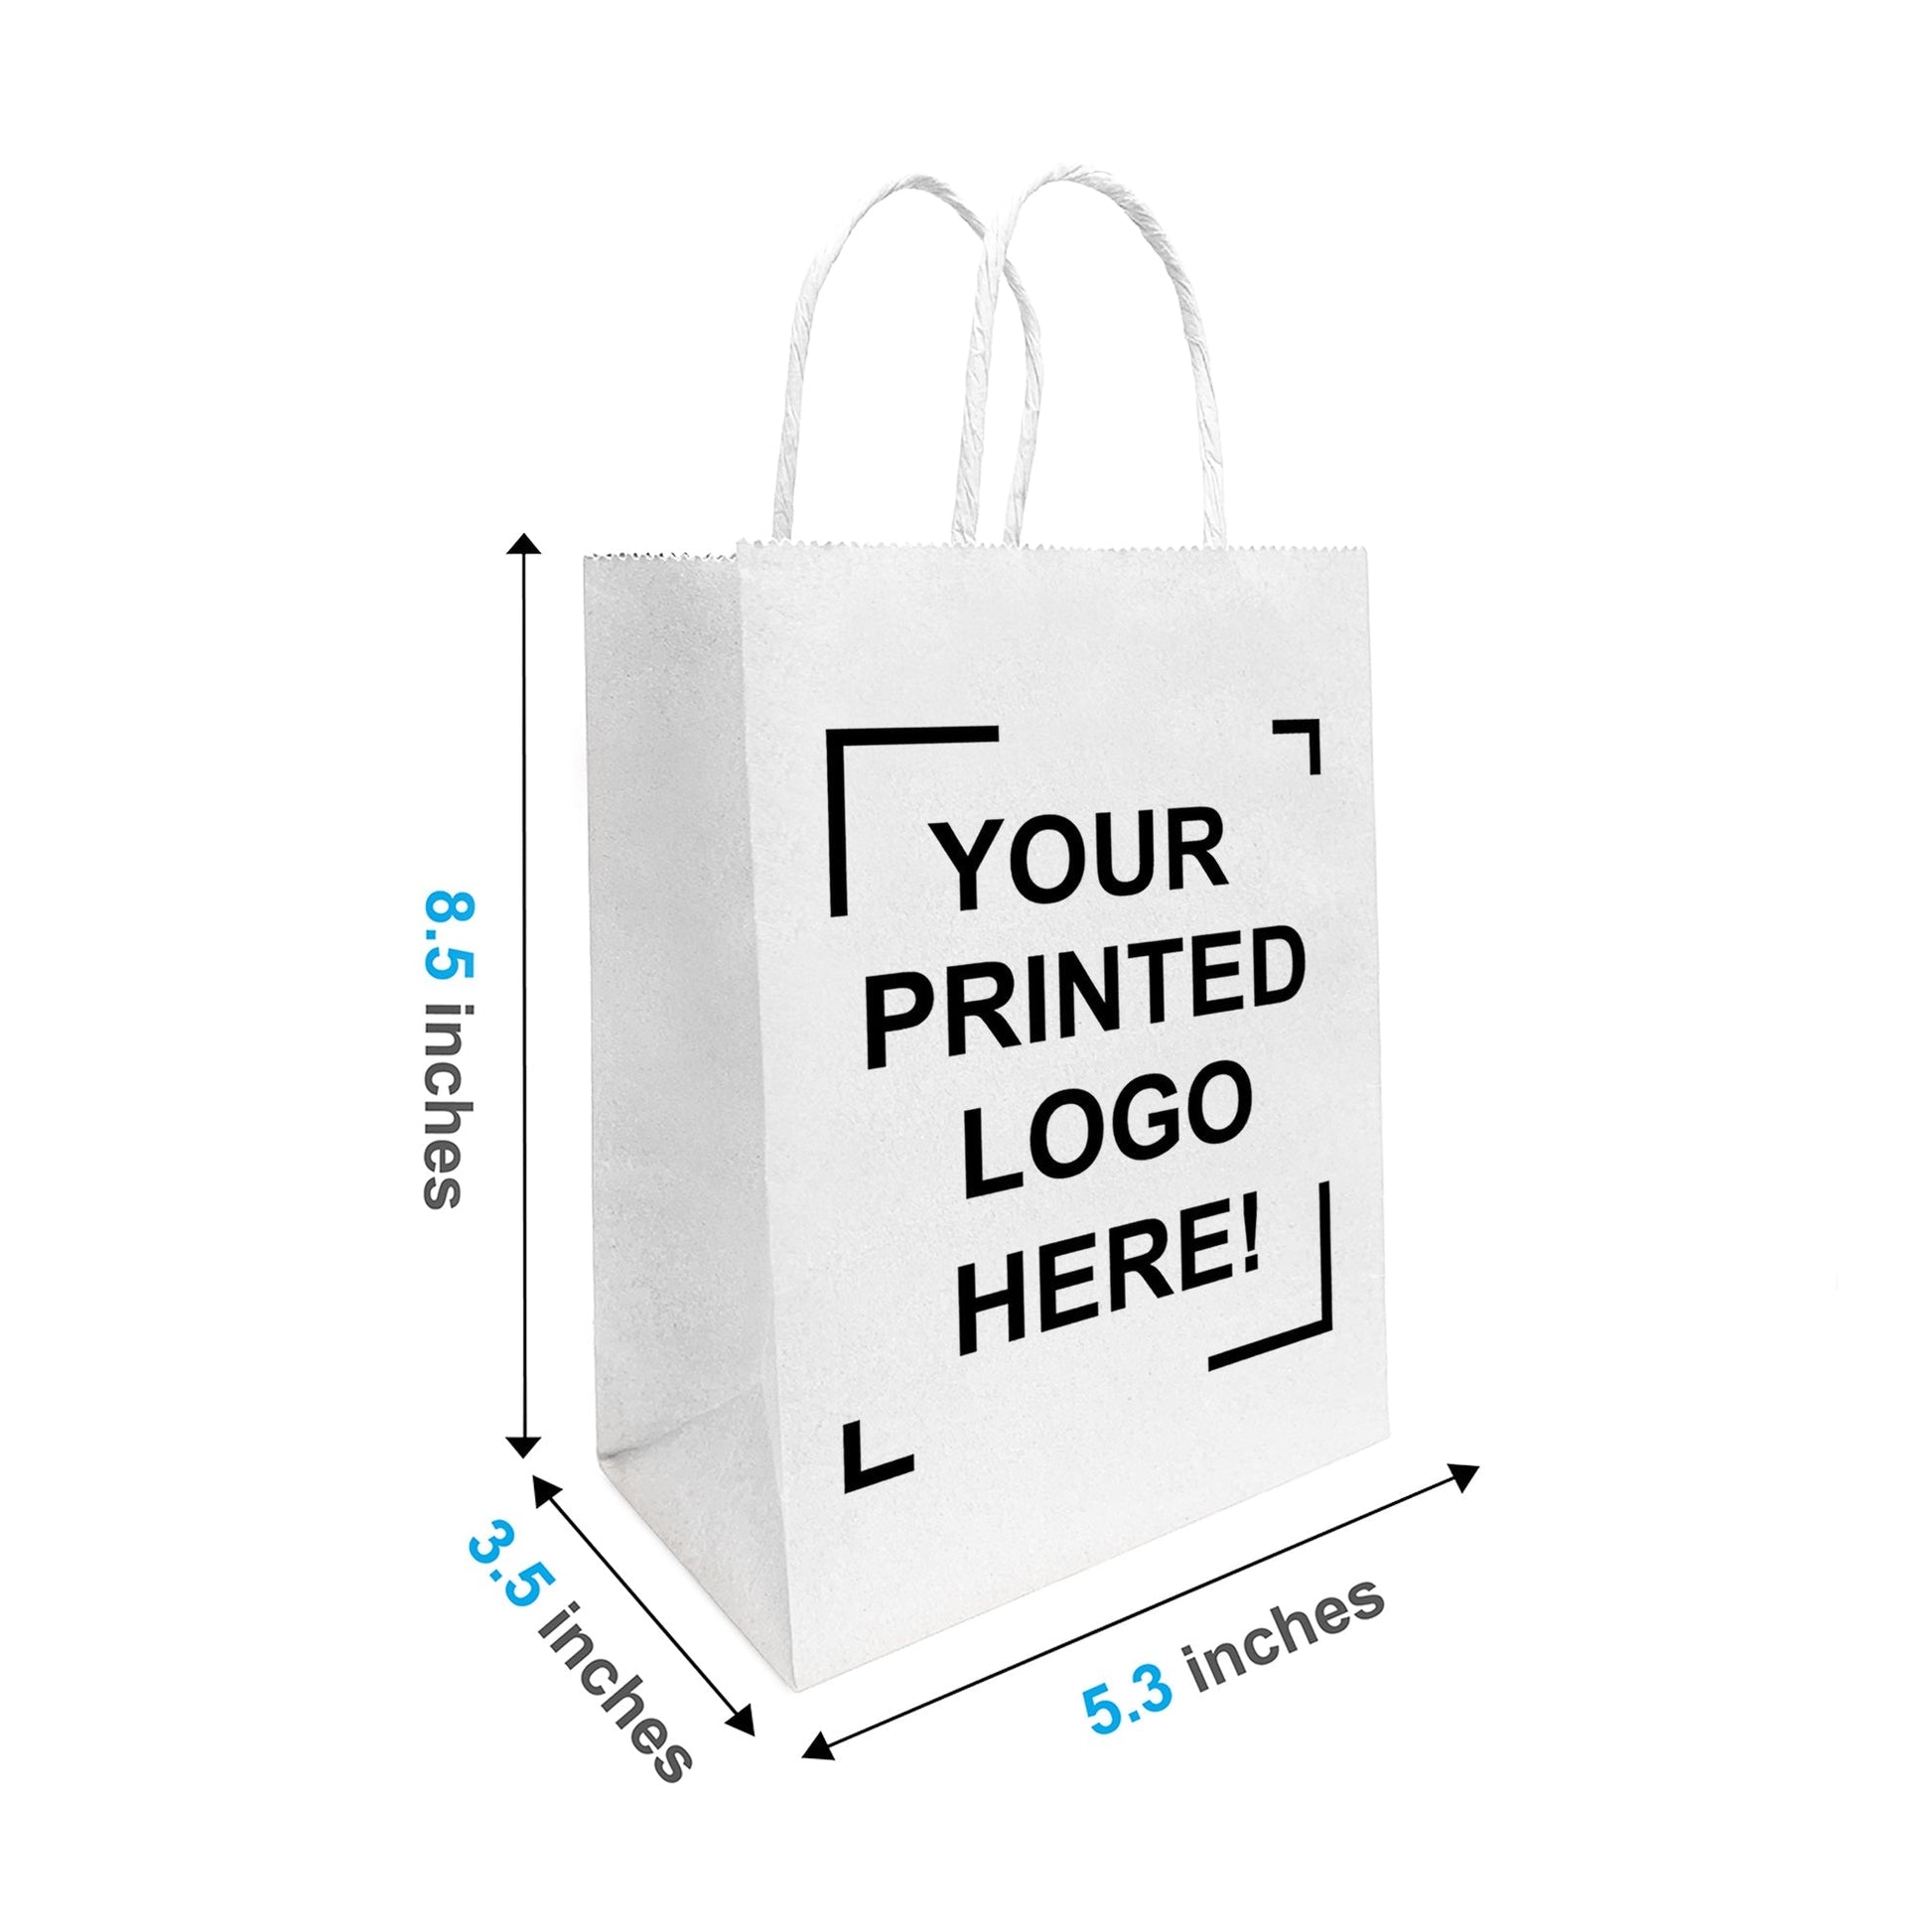 100 Pcs, Gem, 5.3x3.5x8.5 inches, White Paper Bags, with Twisted Handle, Full Color Custom Print